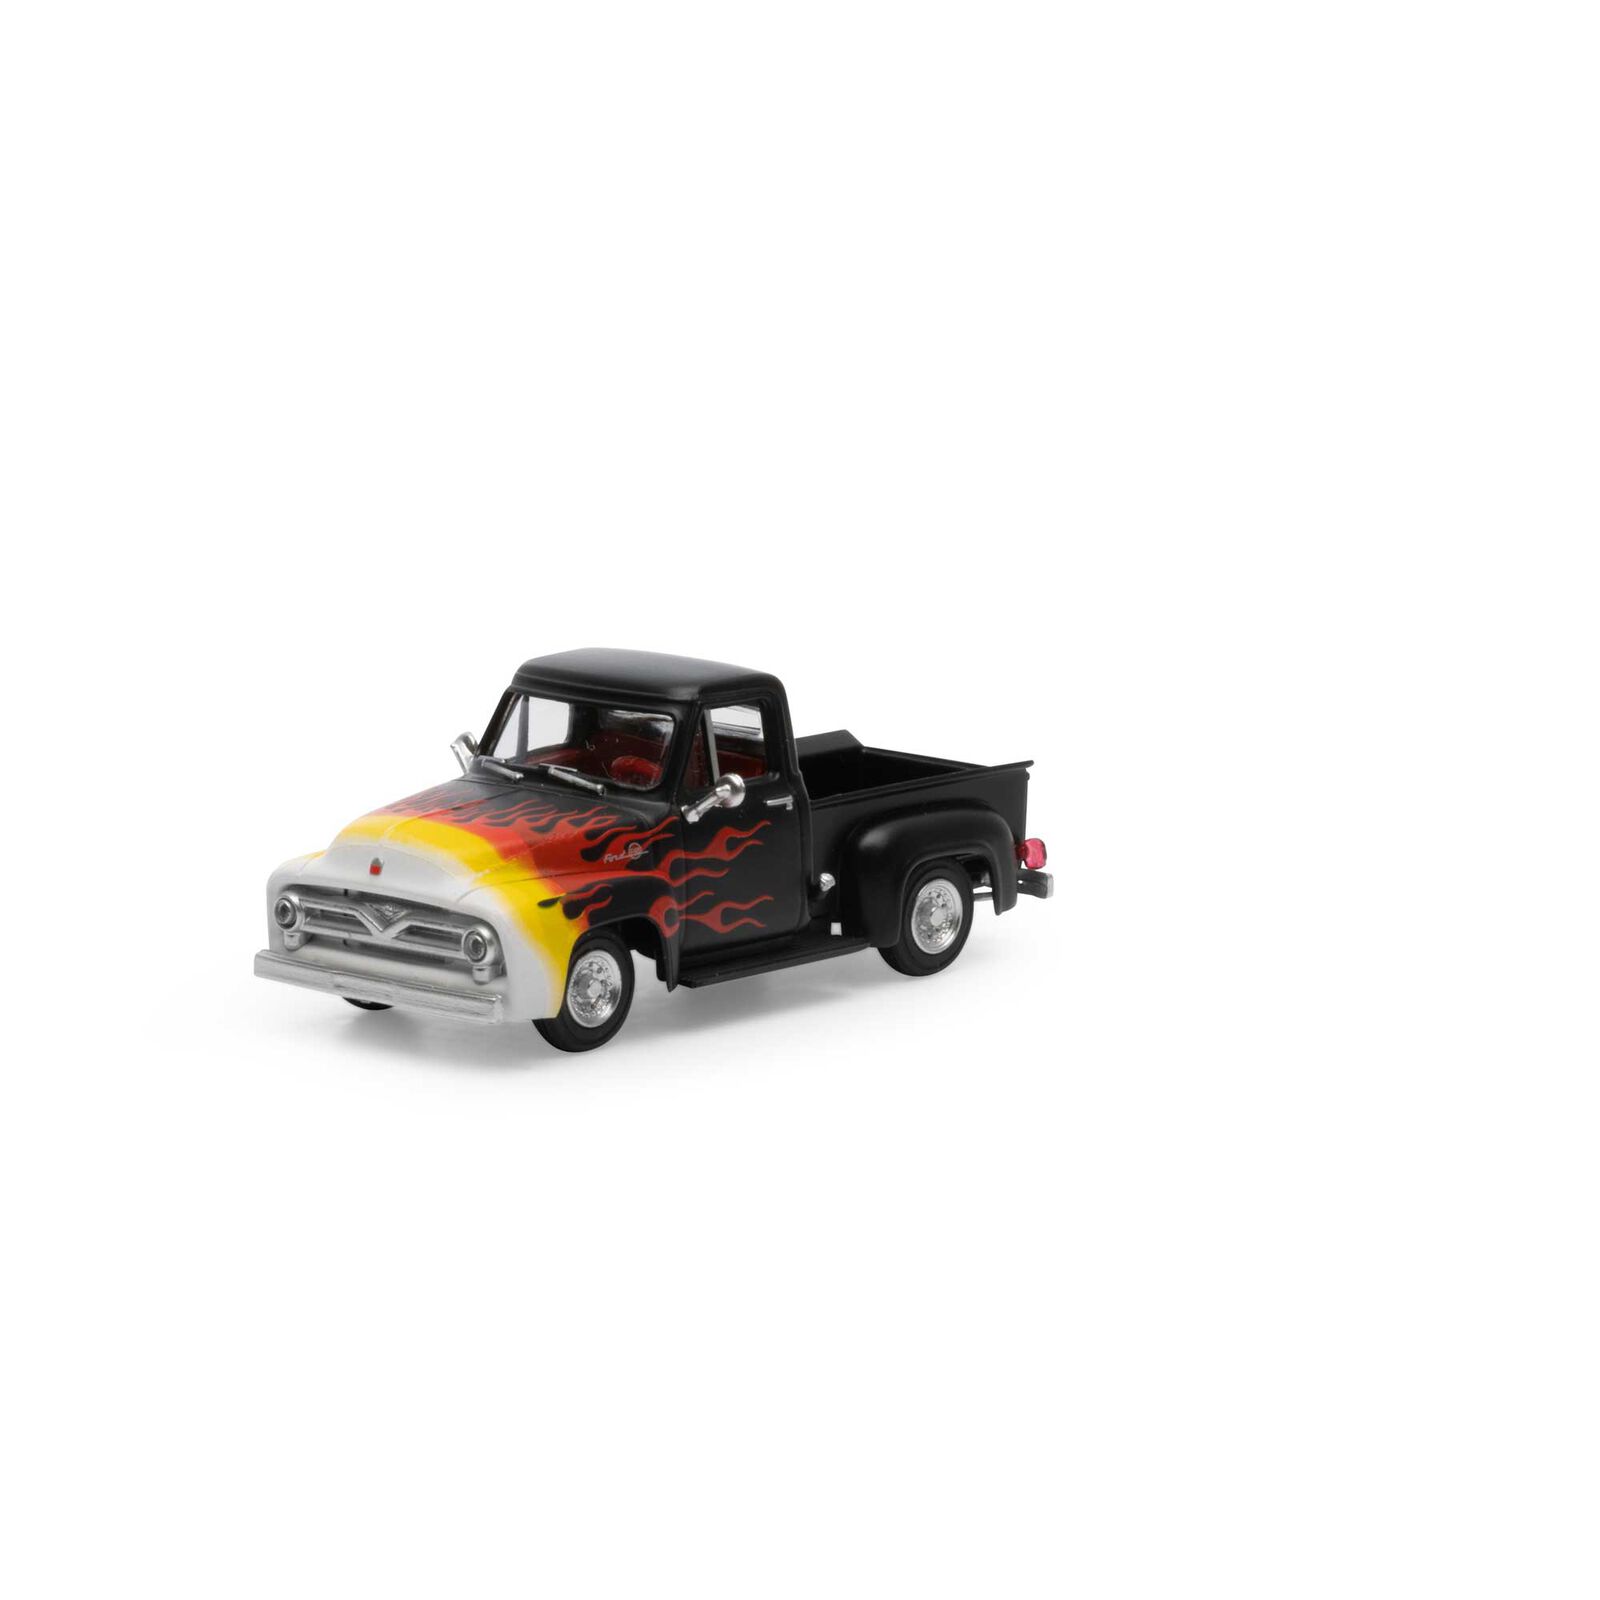 Athearn RTR 26464 - HO 1955 Ford F-100 Pickup - Black/Flames